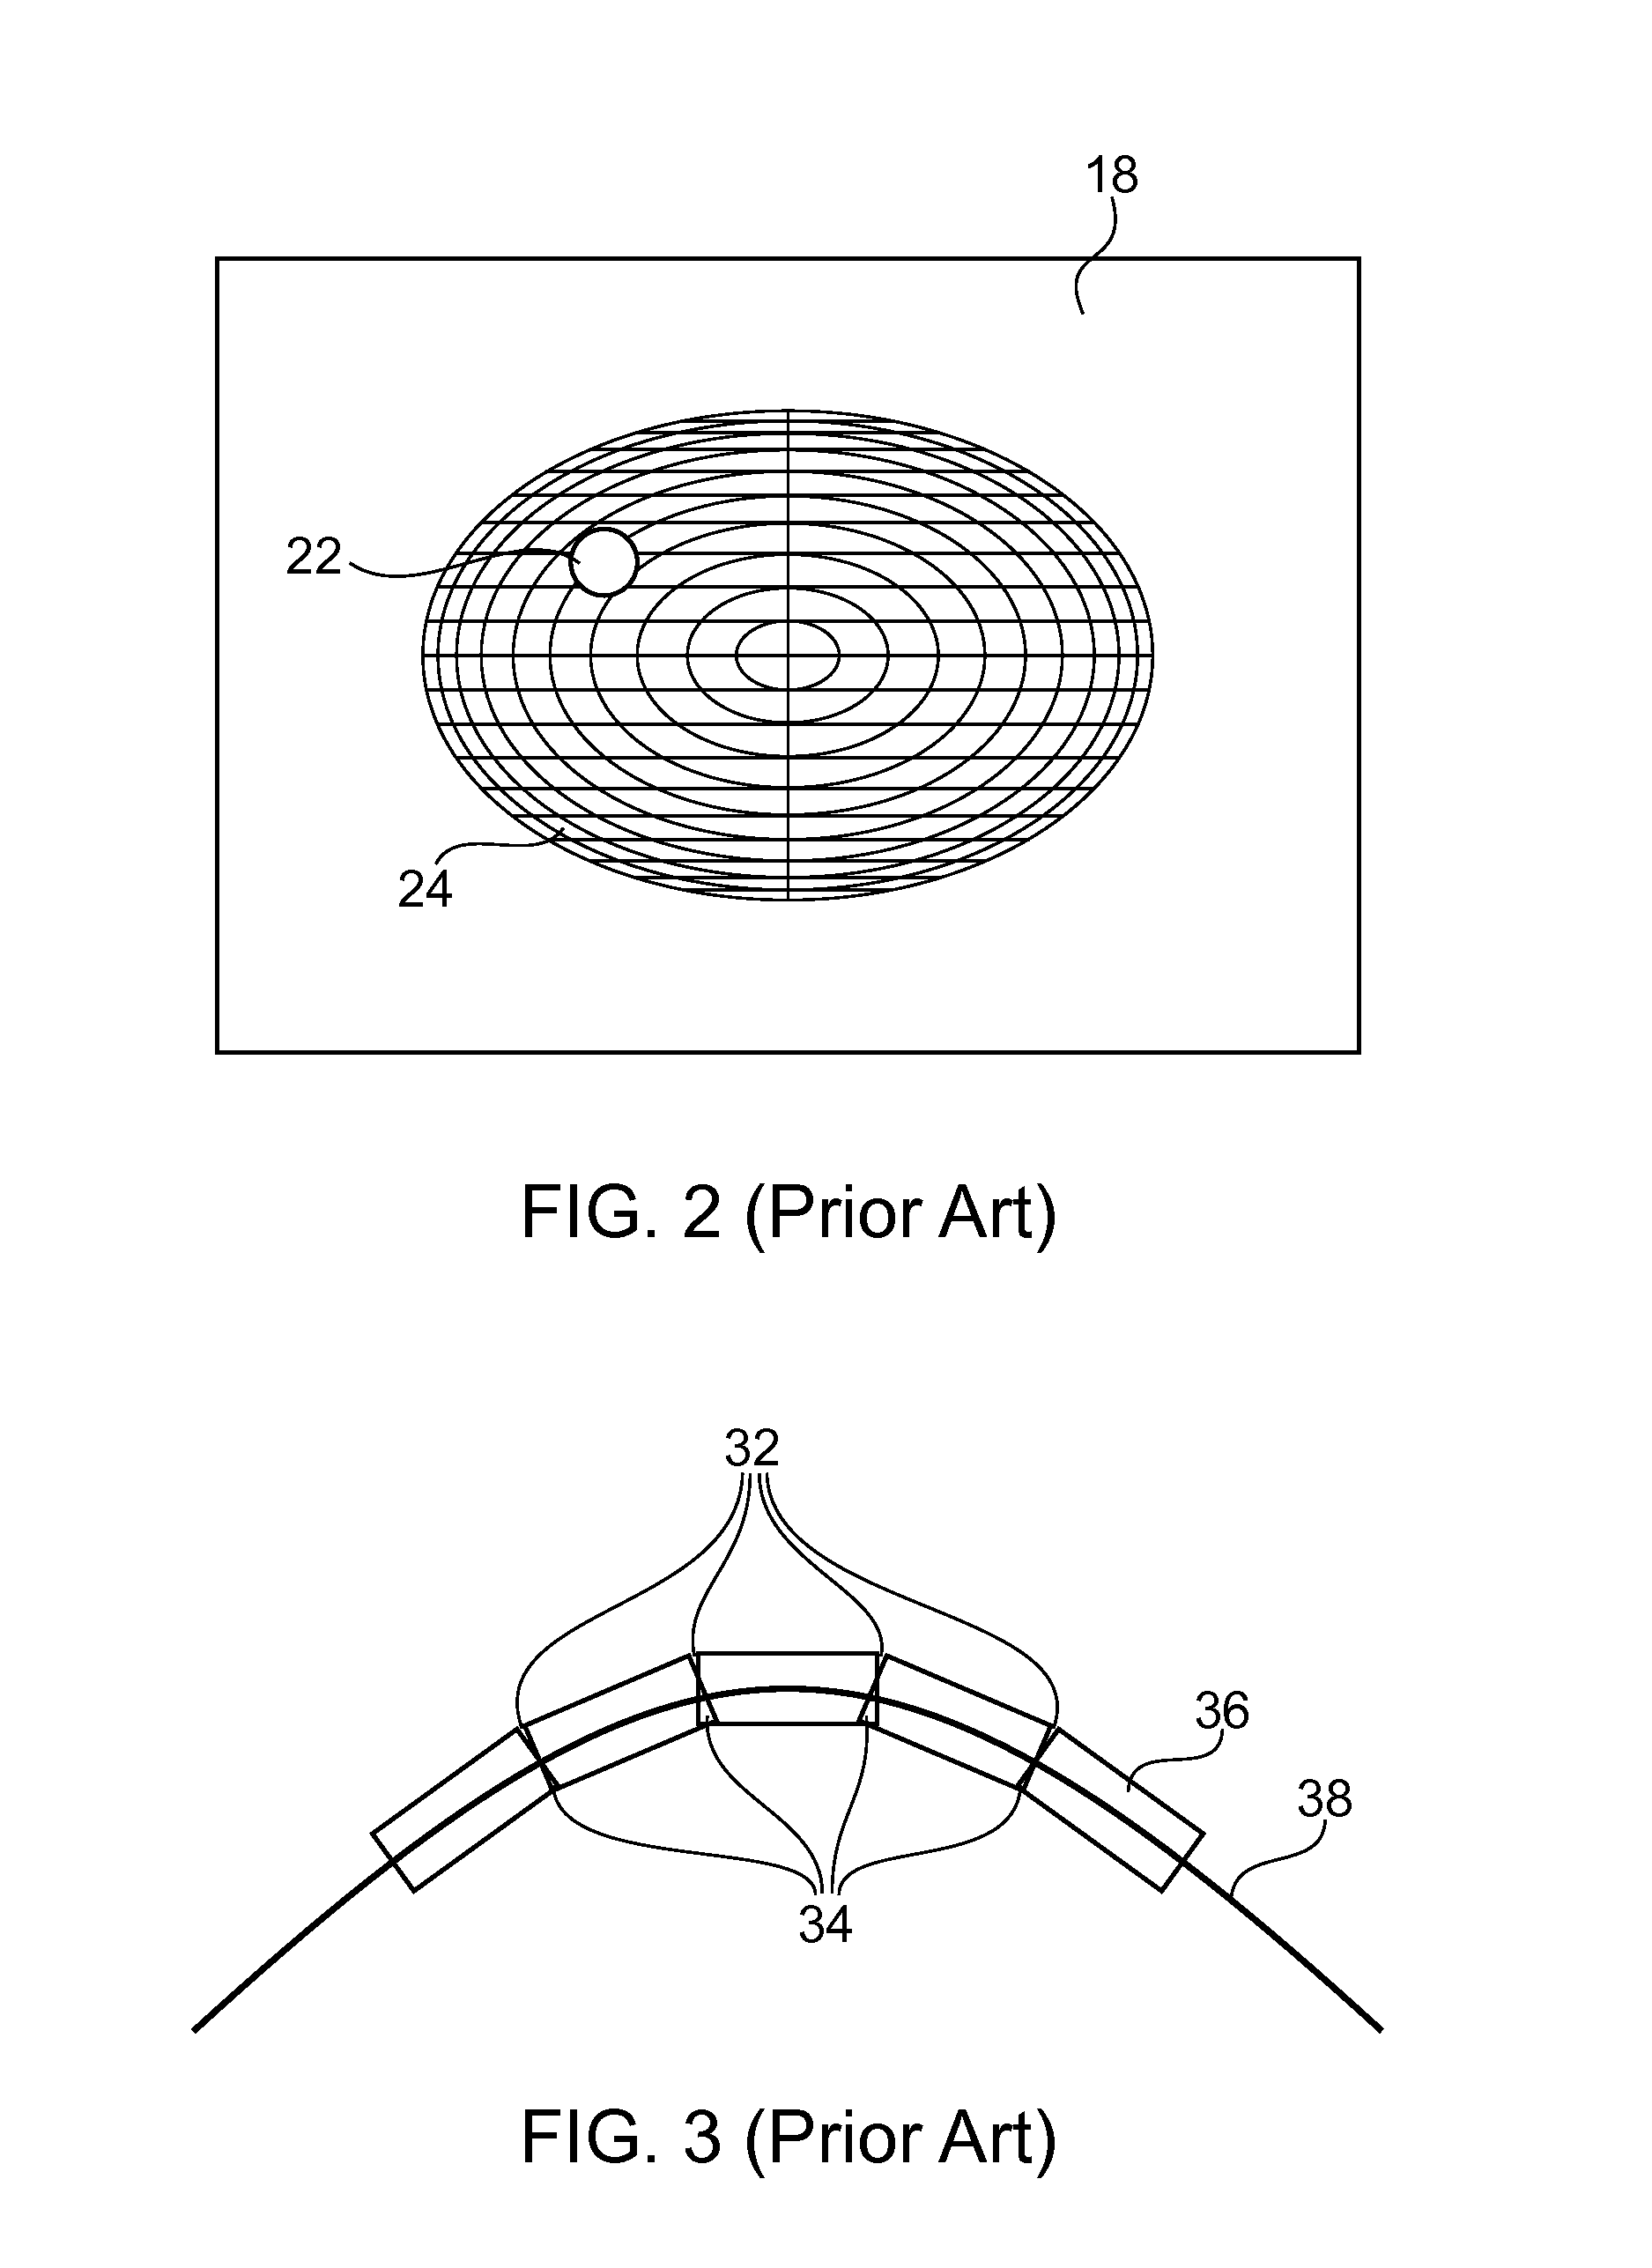 System and Method of Addressing Nonlinear Relative Motion for Collision Probability Using Parallelepipeds